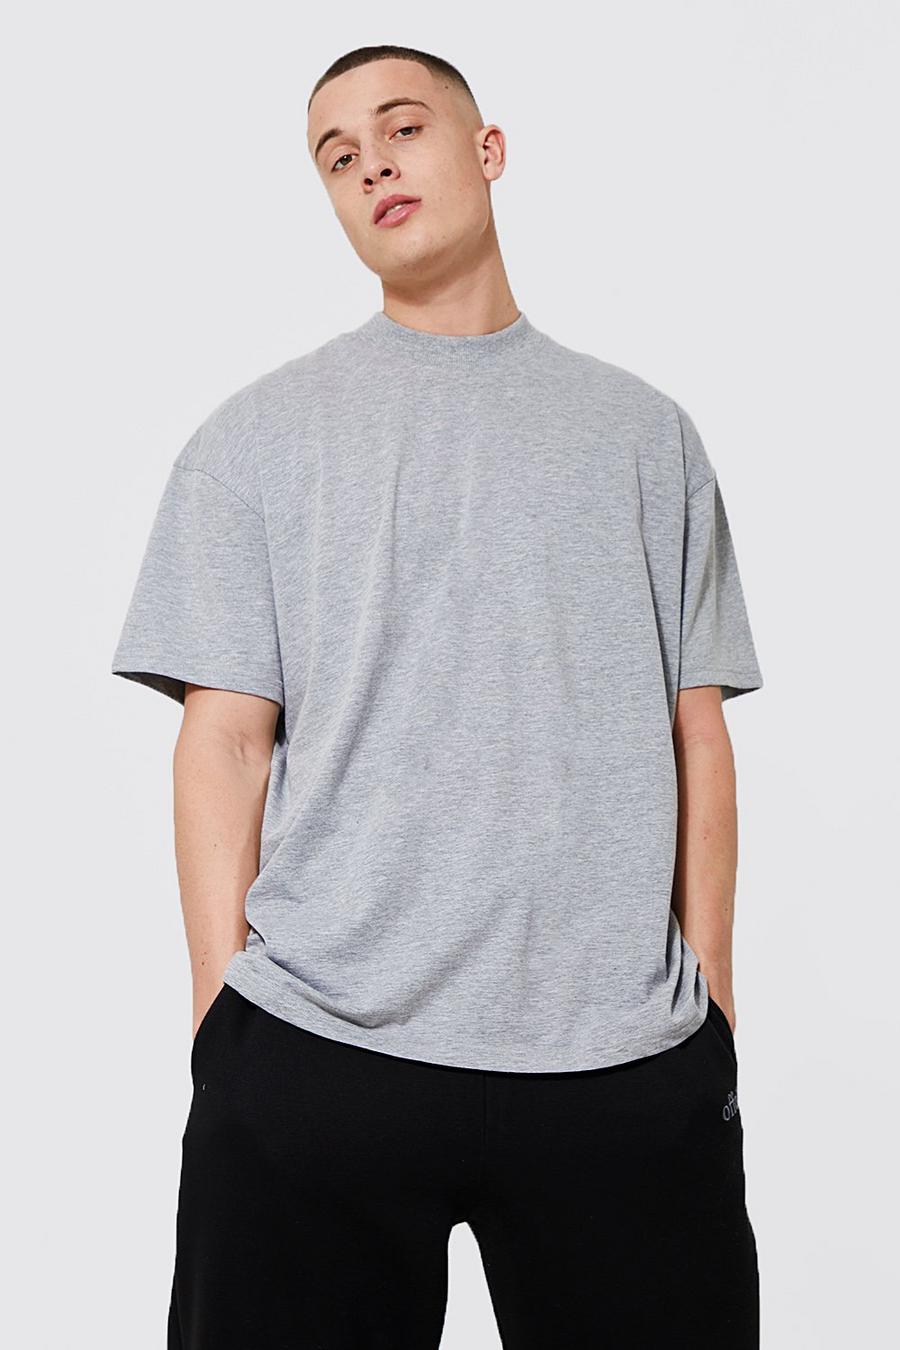 Grey marl grigio Oversized Extended Neck T-Shirt image number 1